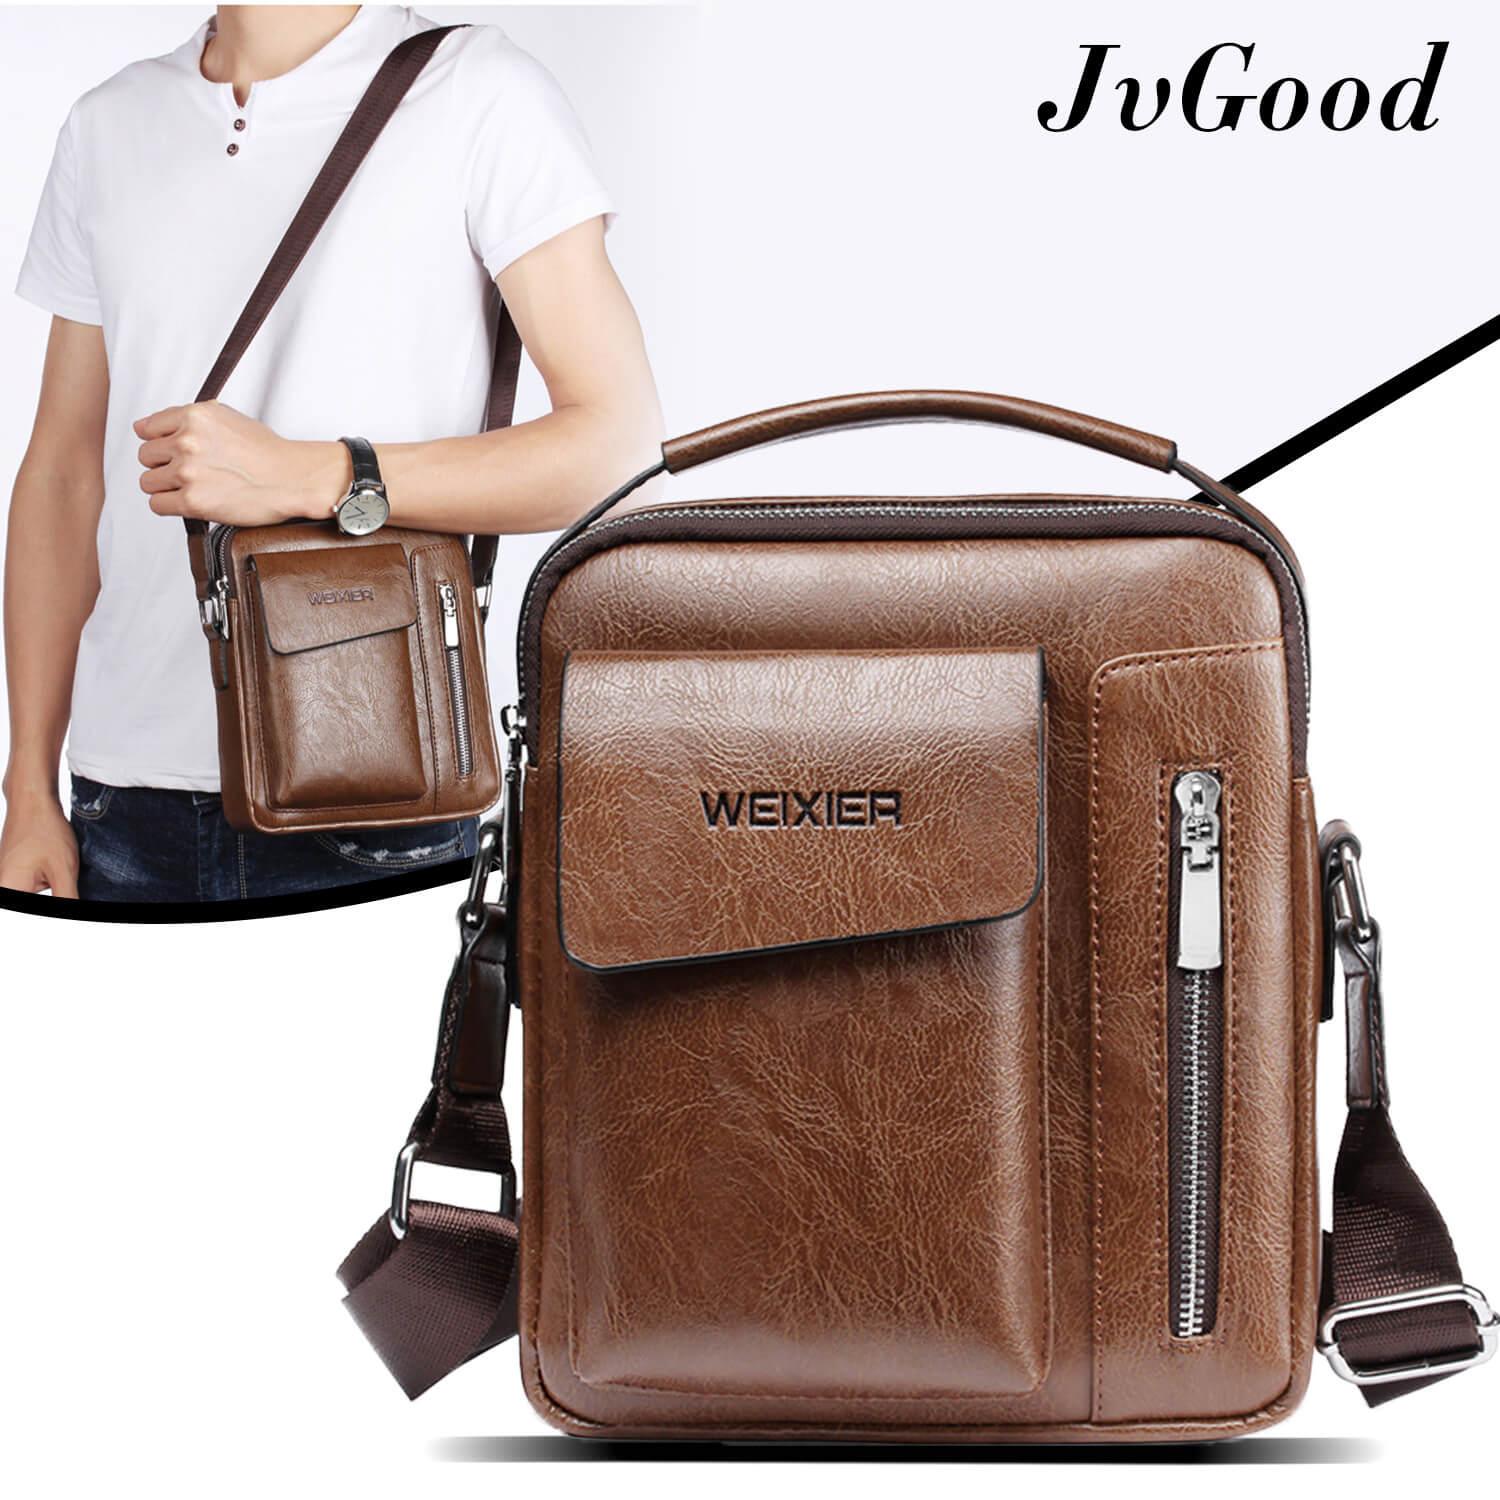 Bags for Men for sale - Mens Fashion Bags online brands, prices & reviews in Philippines ...